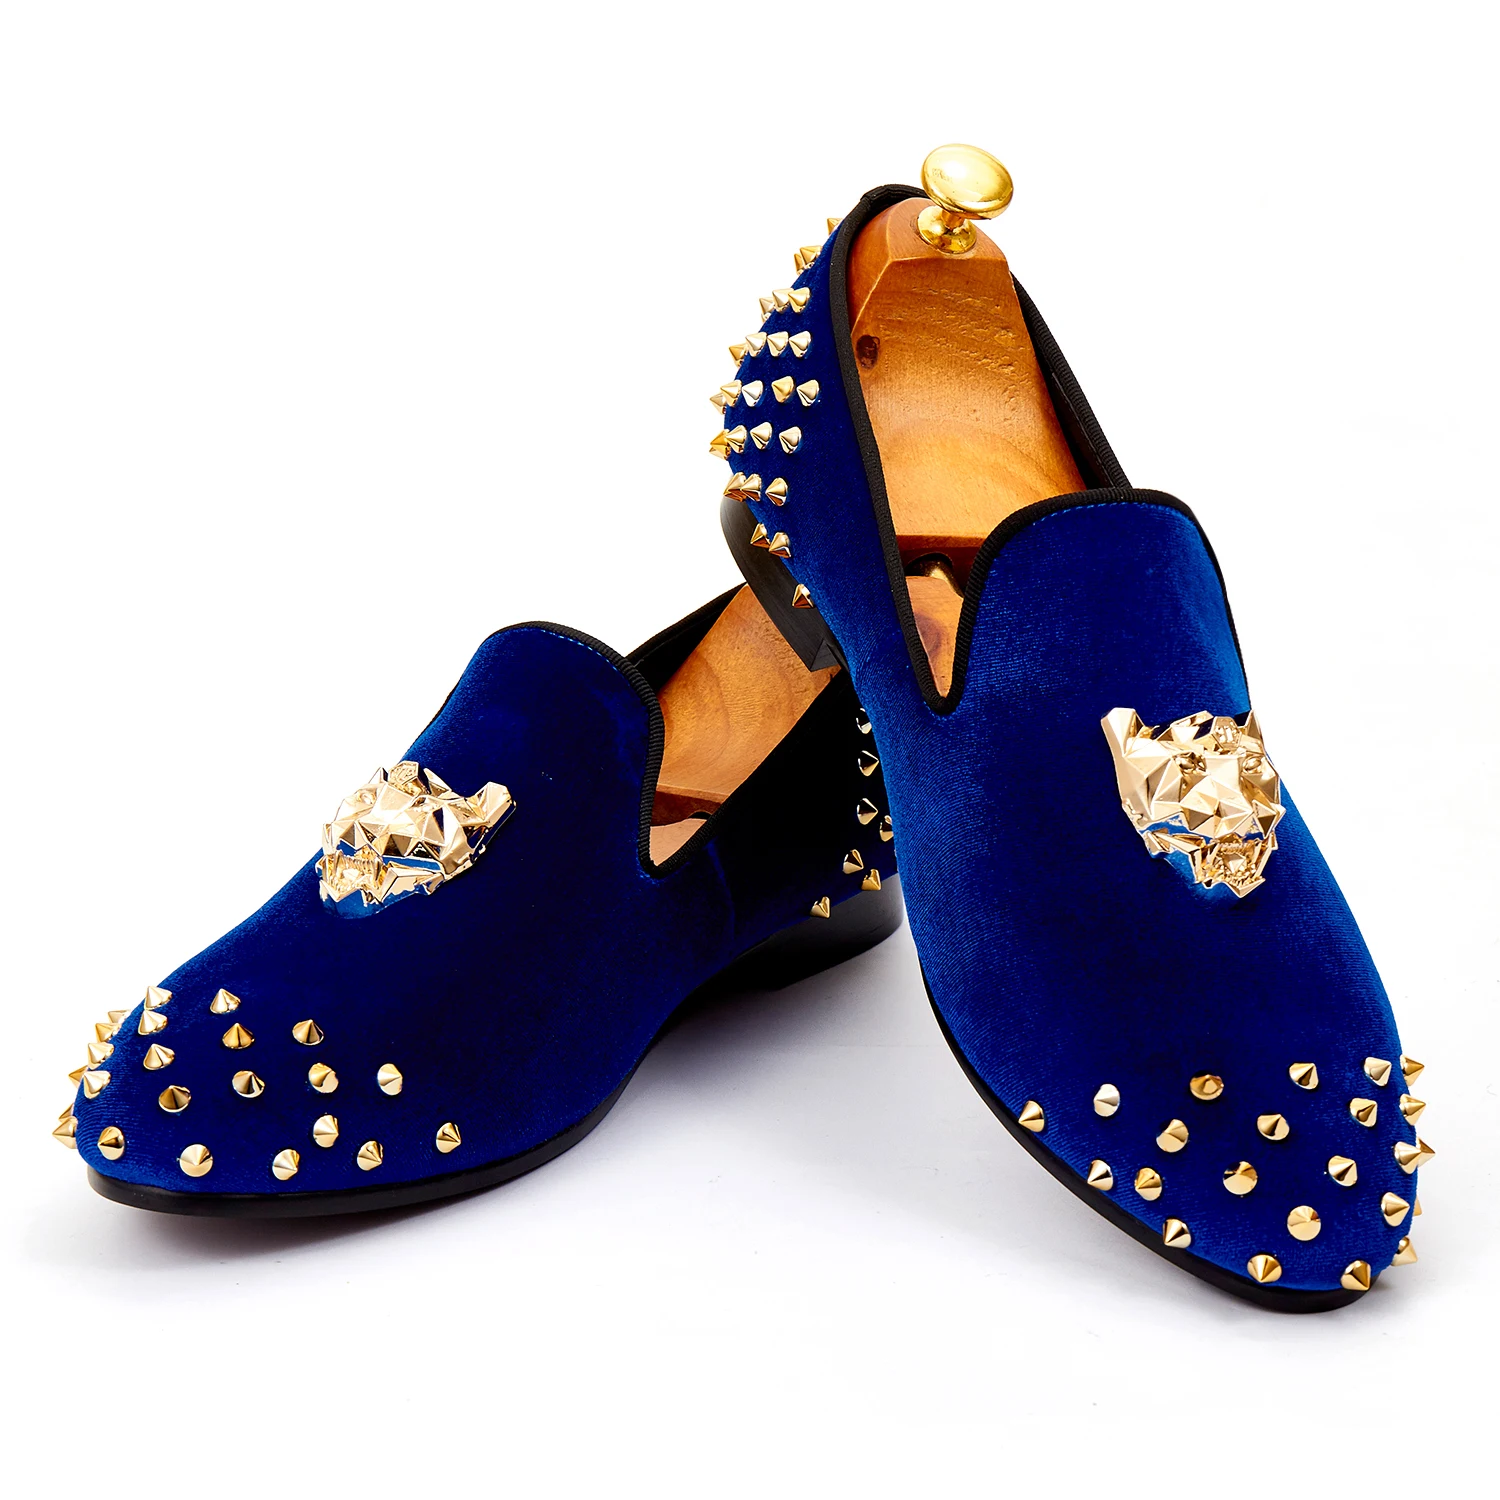 Harpelunde Mens Wedding Shoes Spikes Blue Velvet Loafers Animal Buckle Flat Shoes Size 7 14 